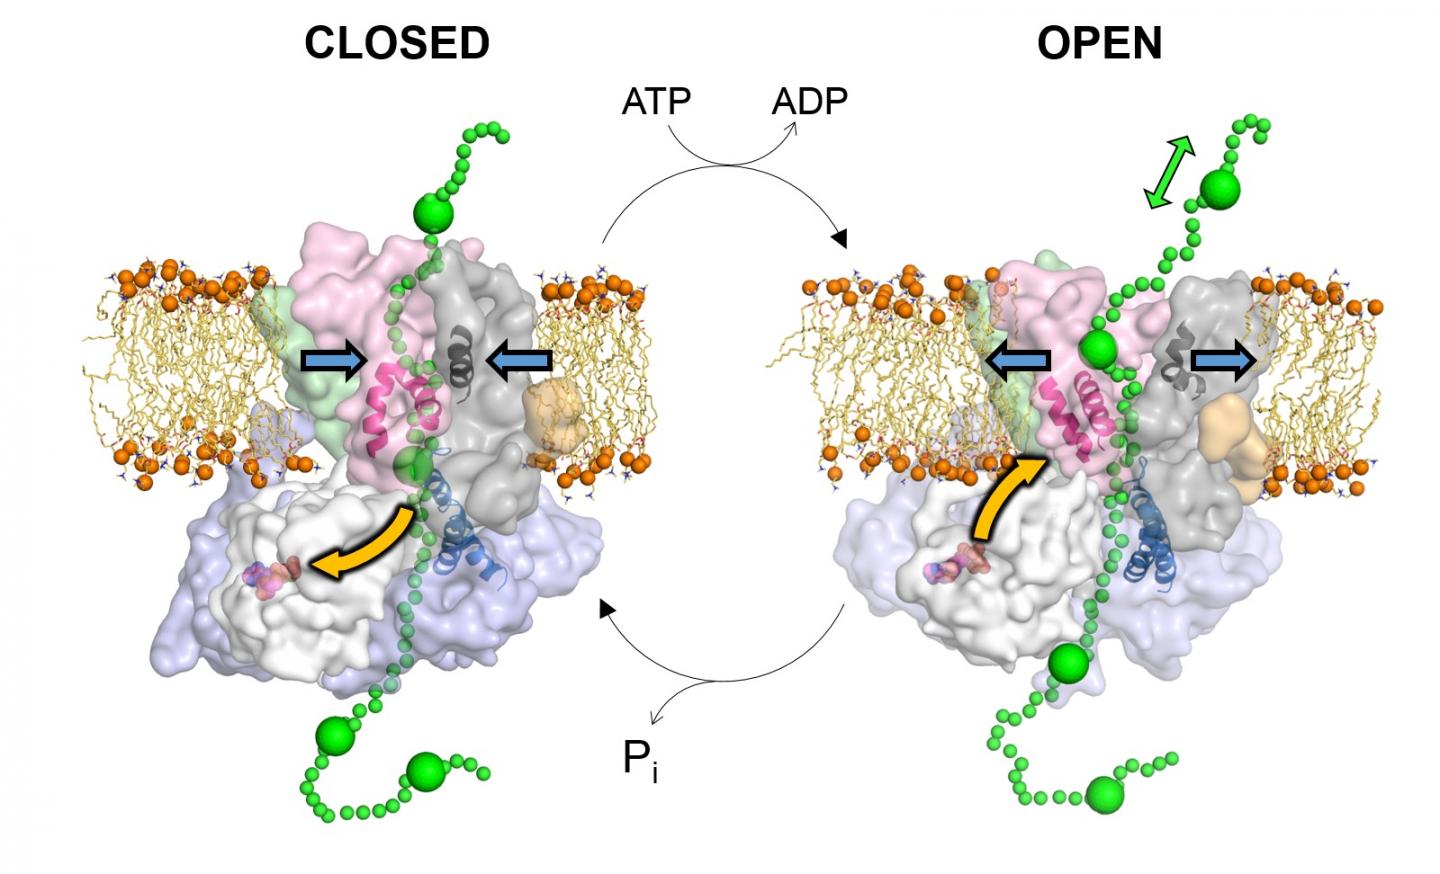 Overview of Proposed Model for ATP-Driven Protein Translocation Through SecYEG-SecA Complex